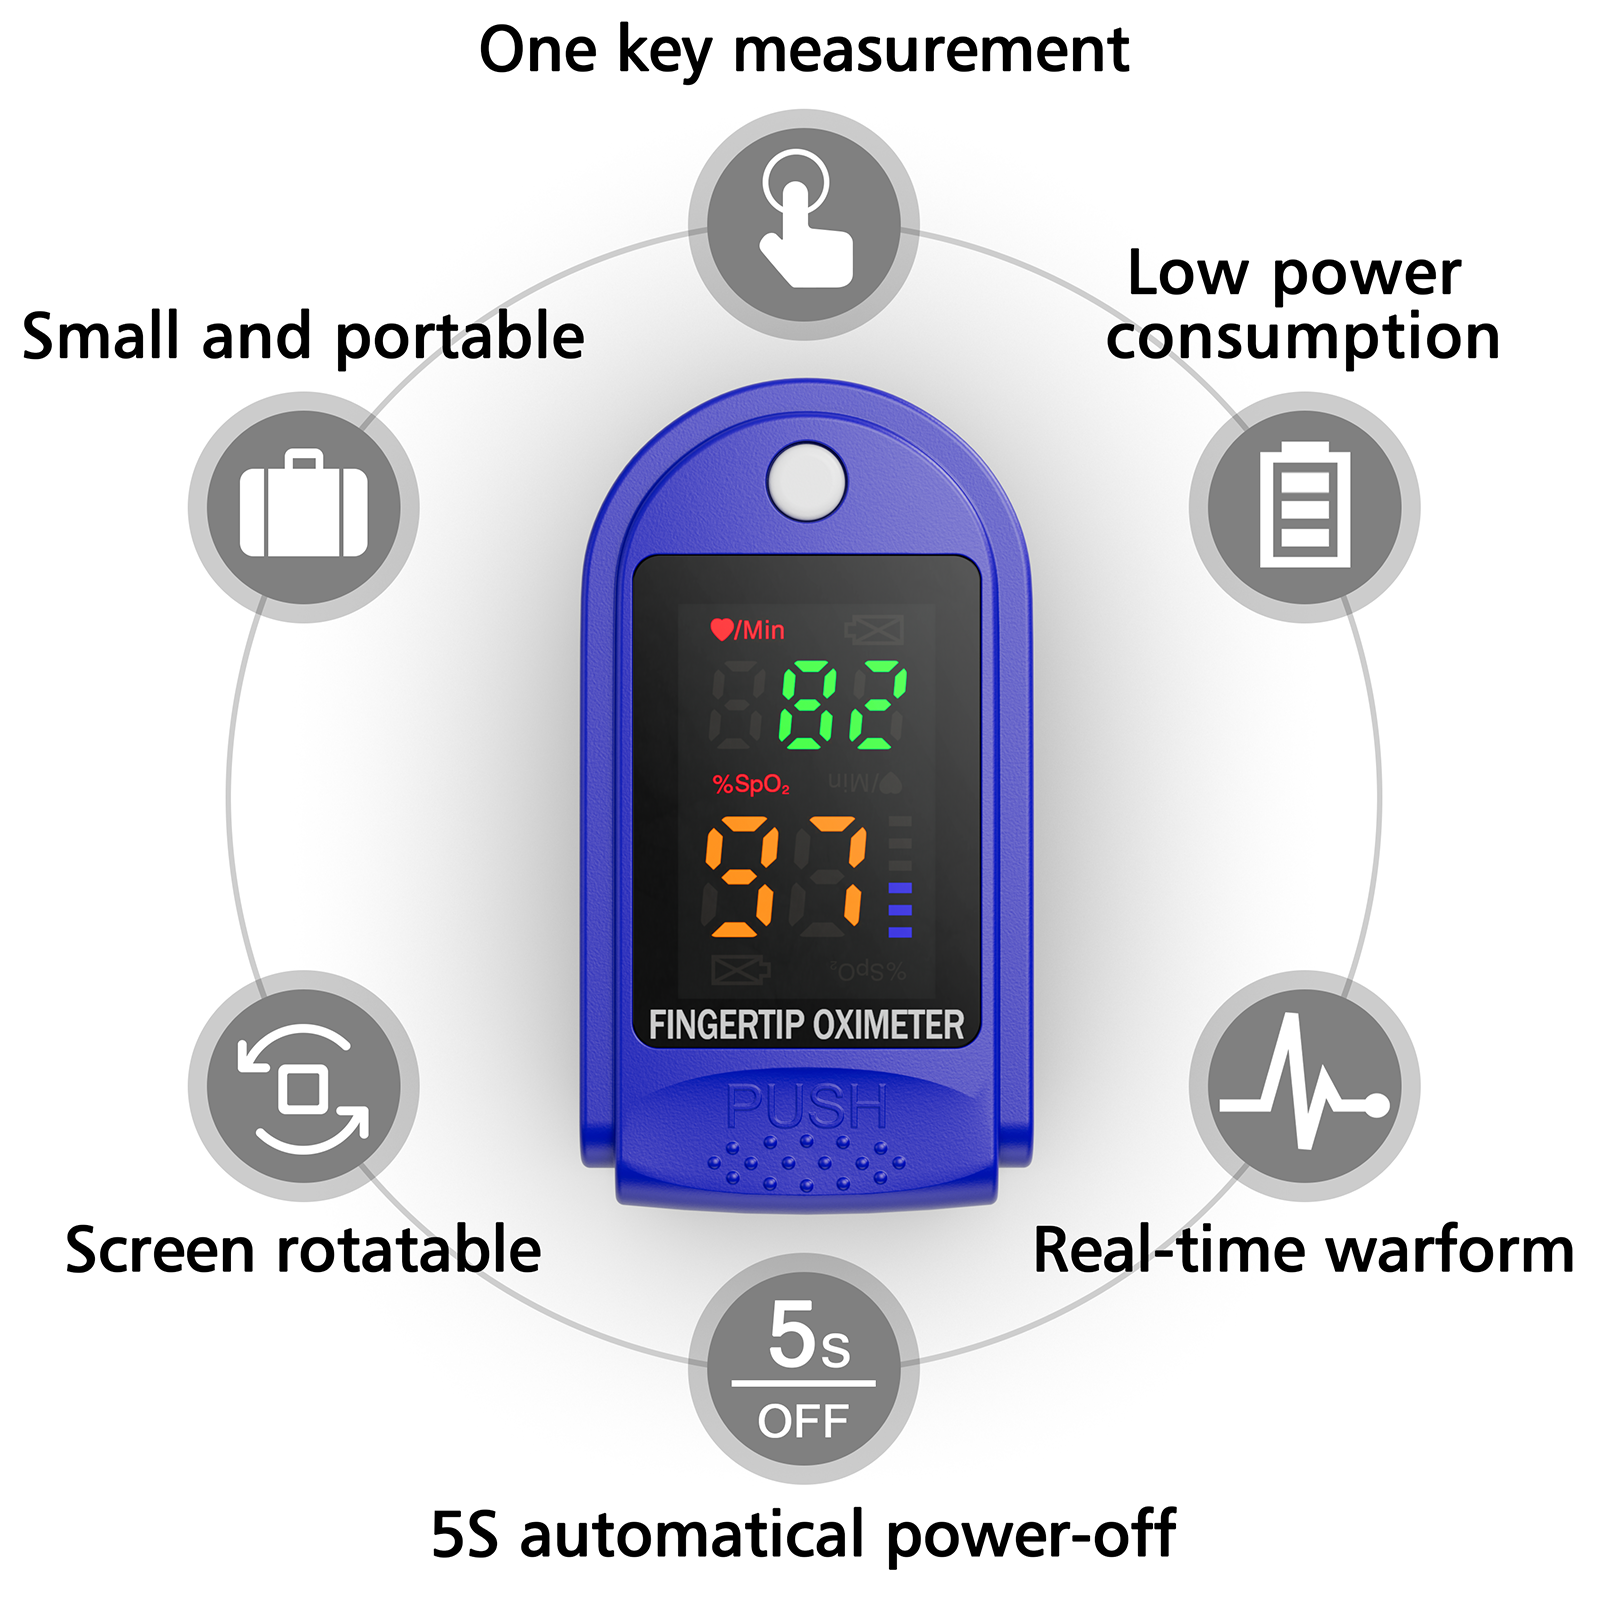 DIGITNOW Fingertip Pulse Oximeter - Large OLED Display Pulse Oximeter Finger Oximetry Blood Oxygen Saturation Monitor for Heart Rate and SpO2